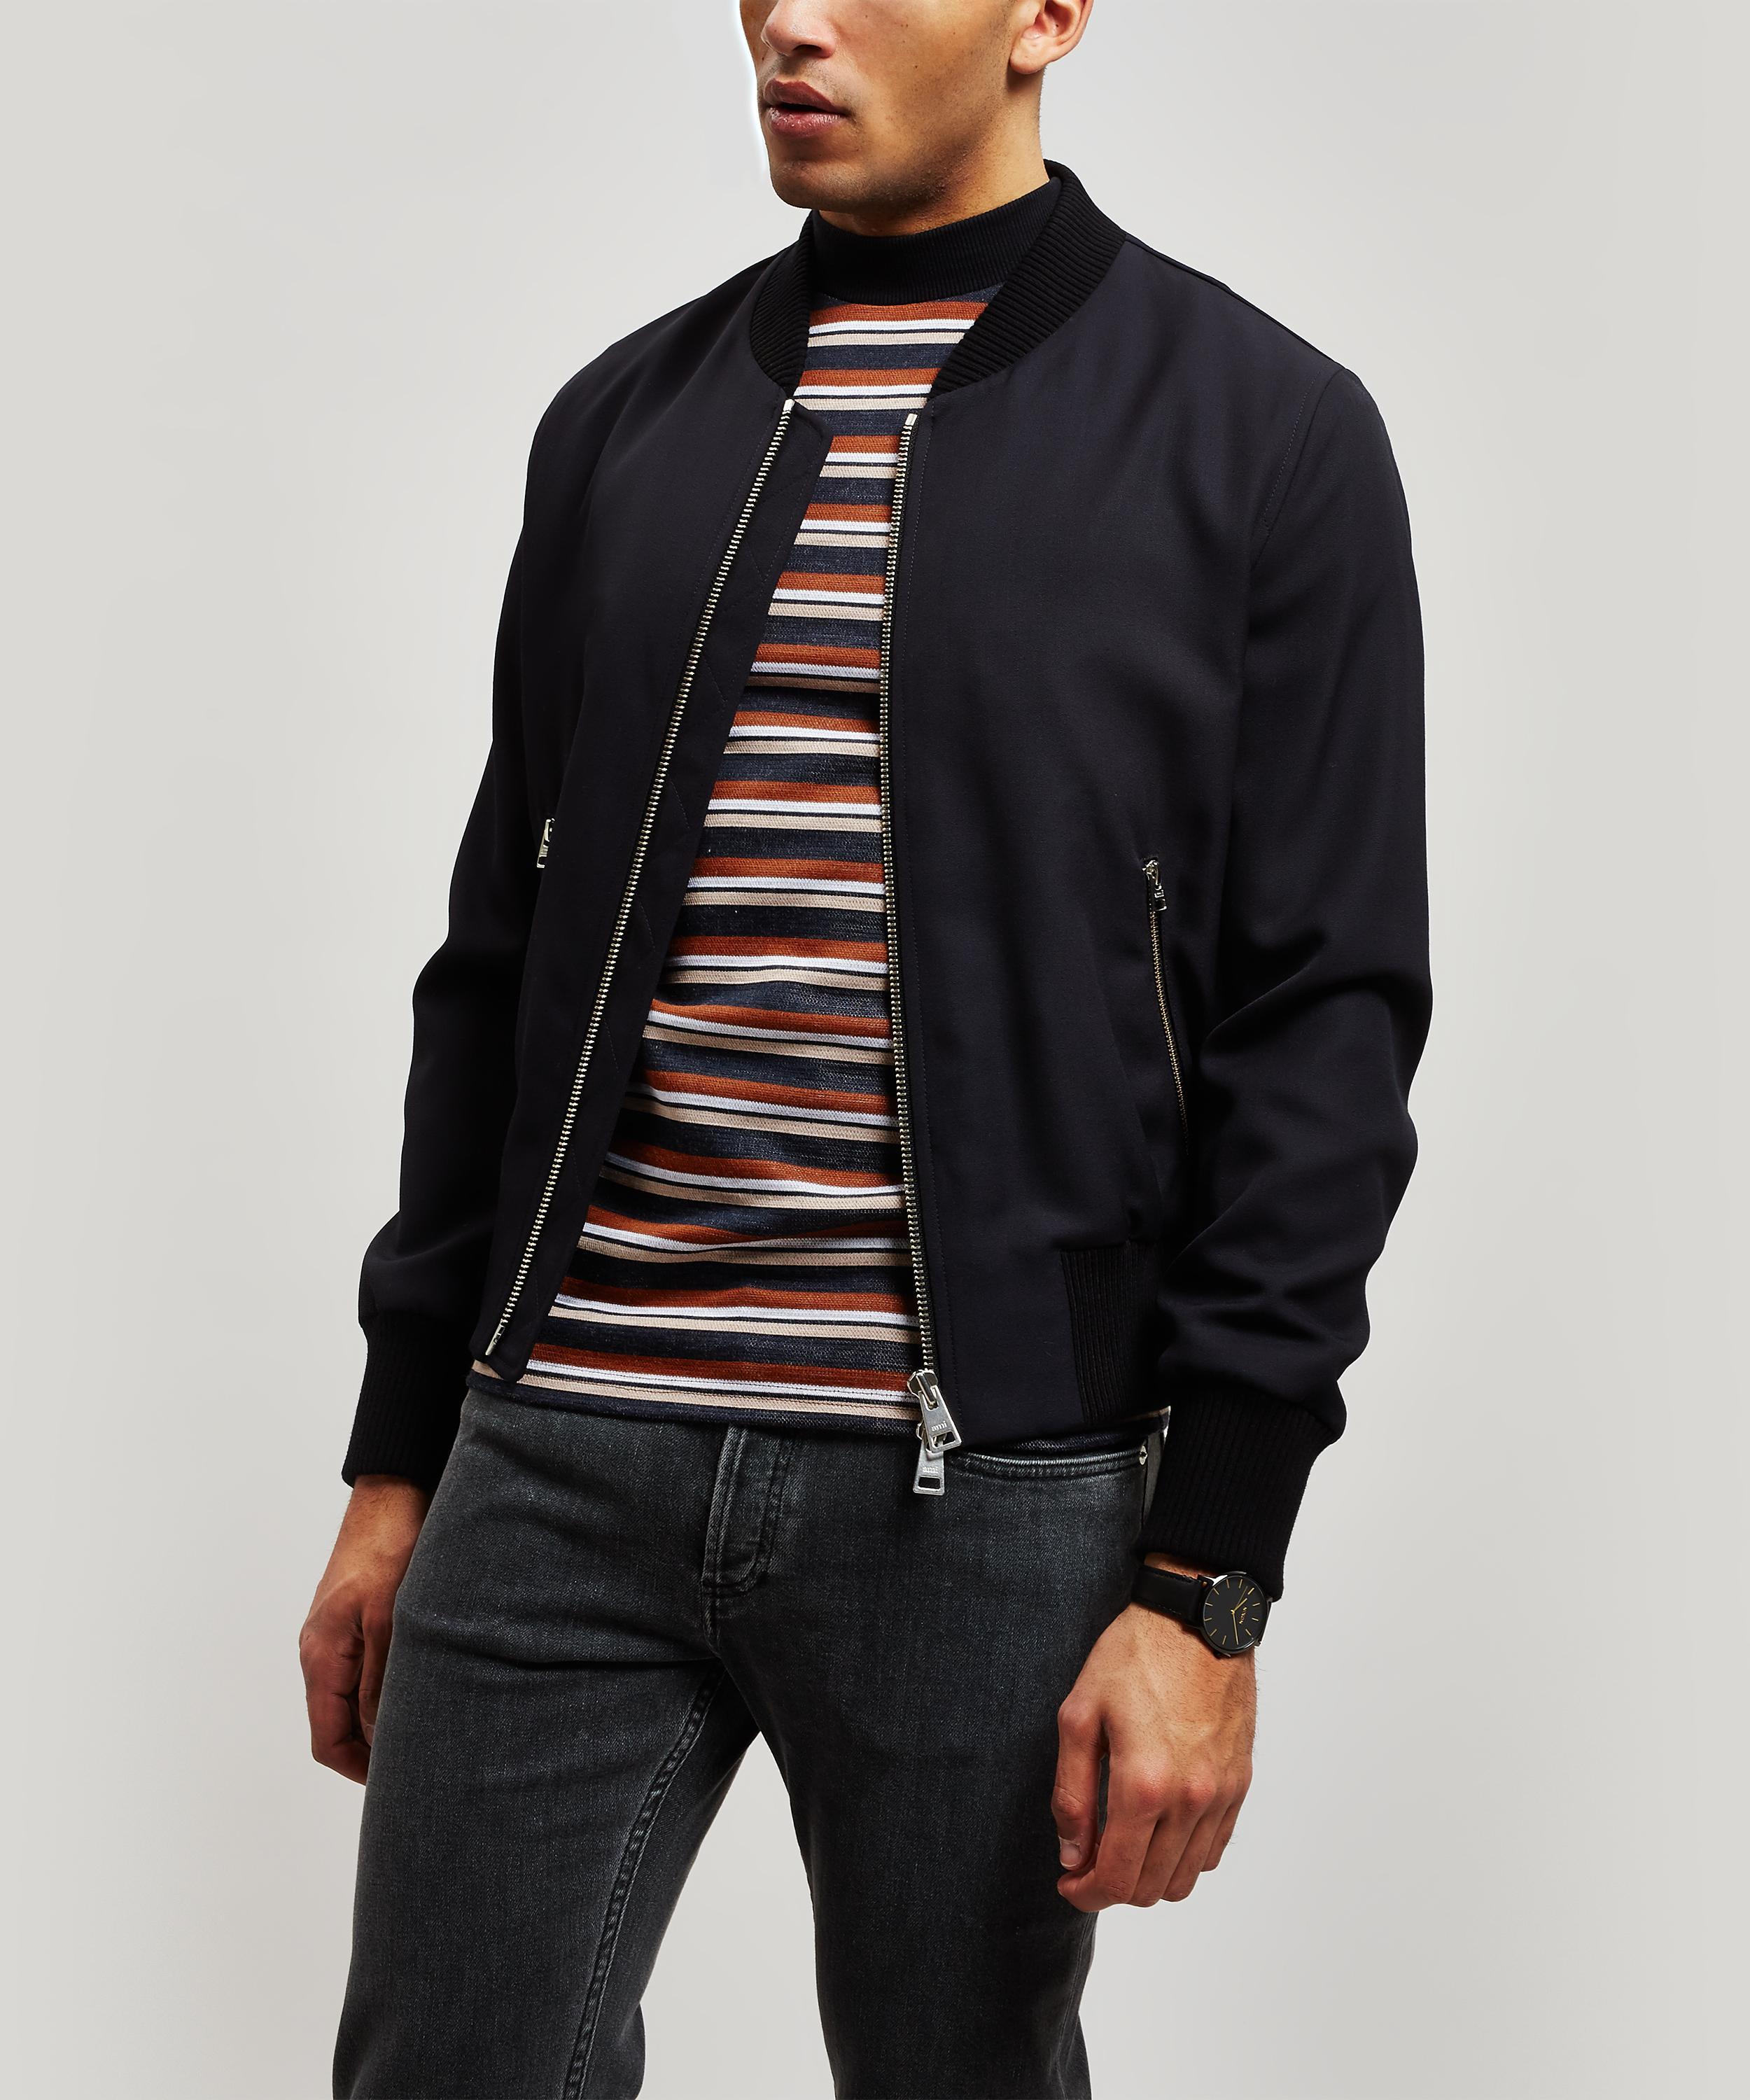 AMI Wool Zipped Bomber Jacket in Navy (Blue) for Men - Lyst